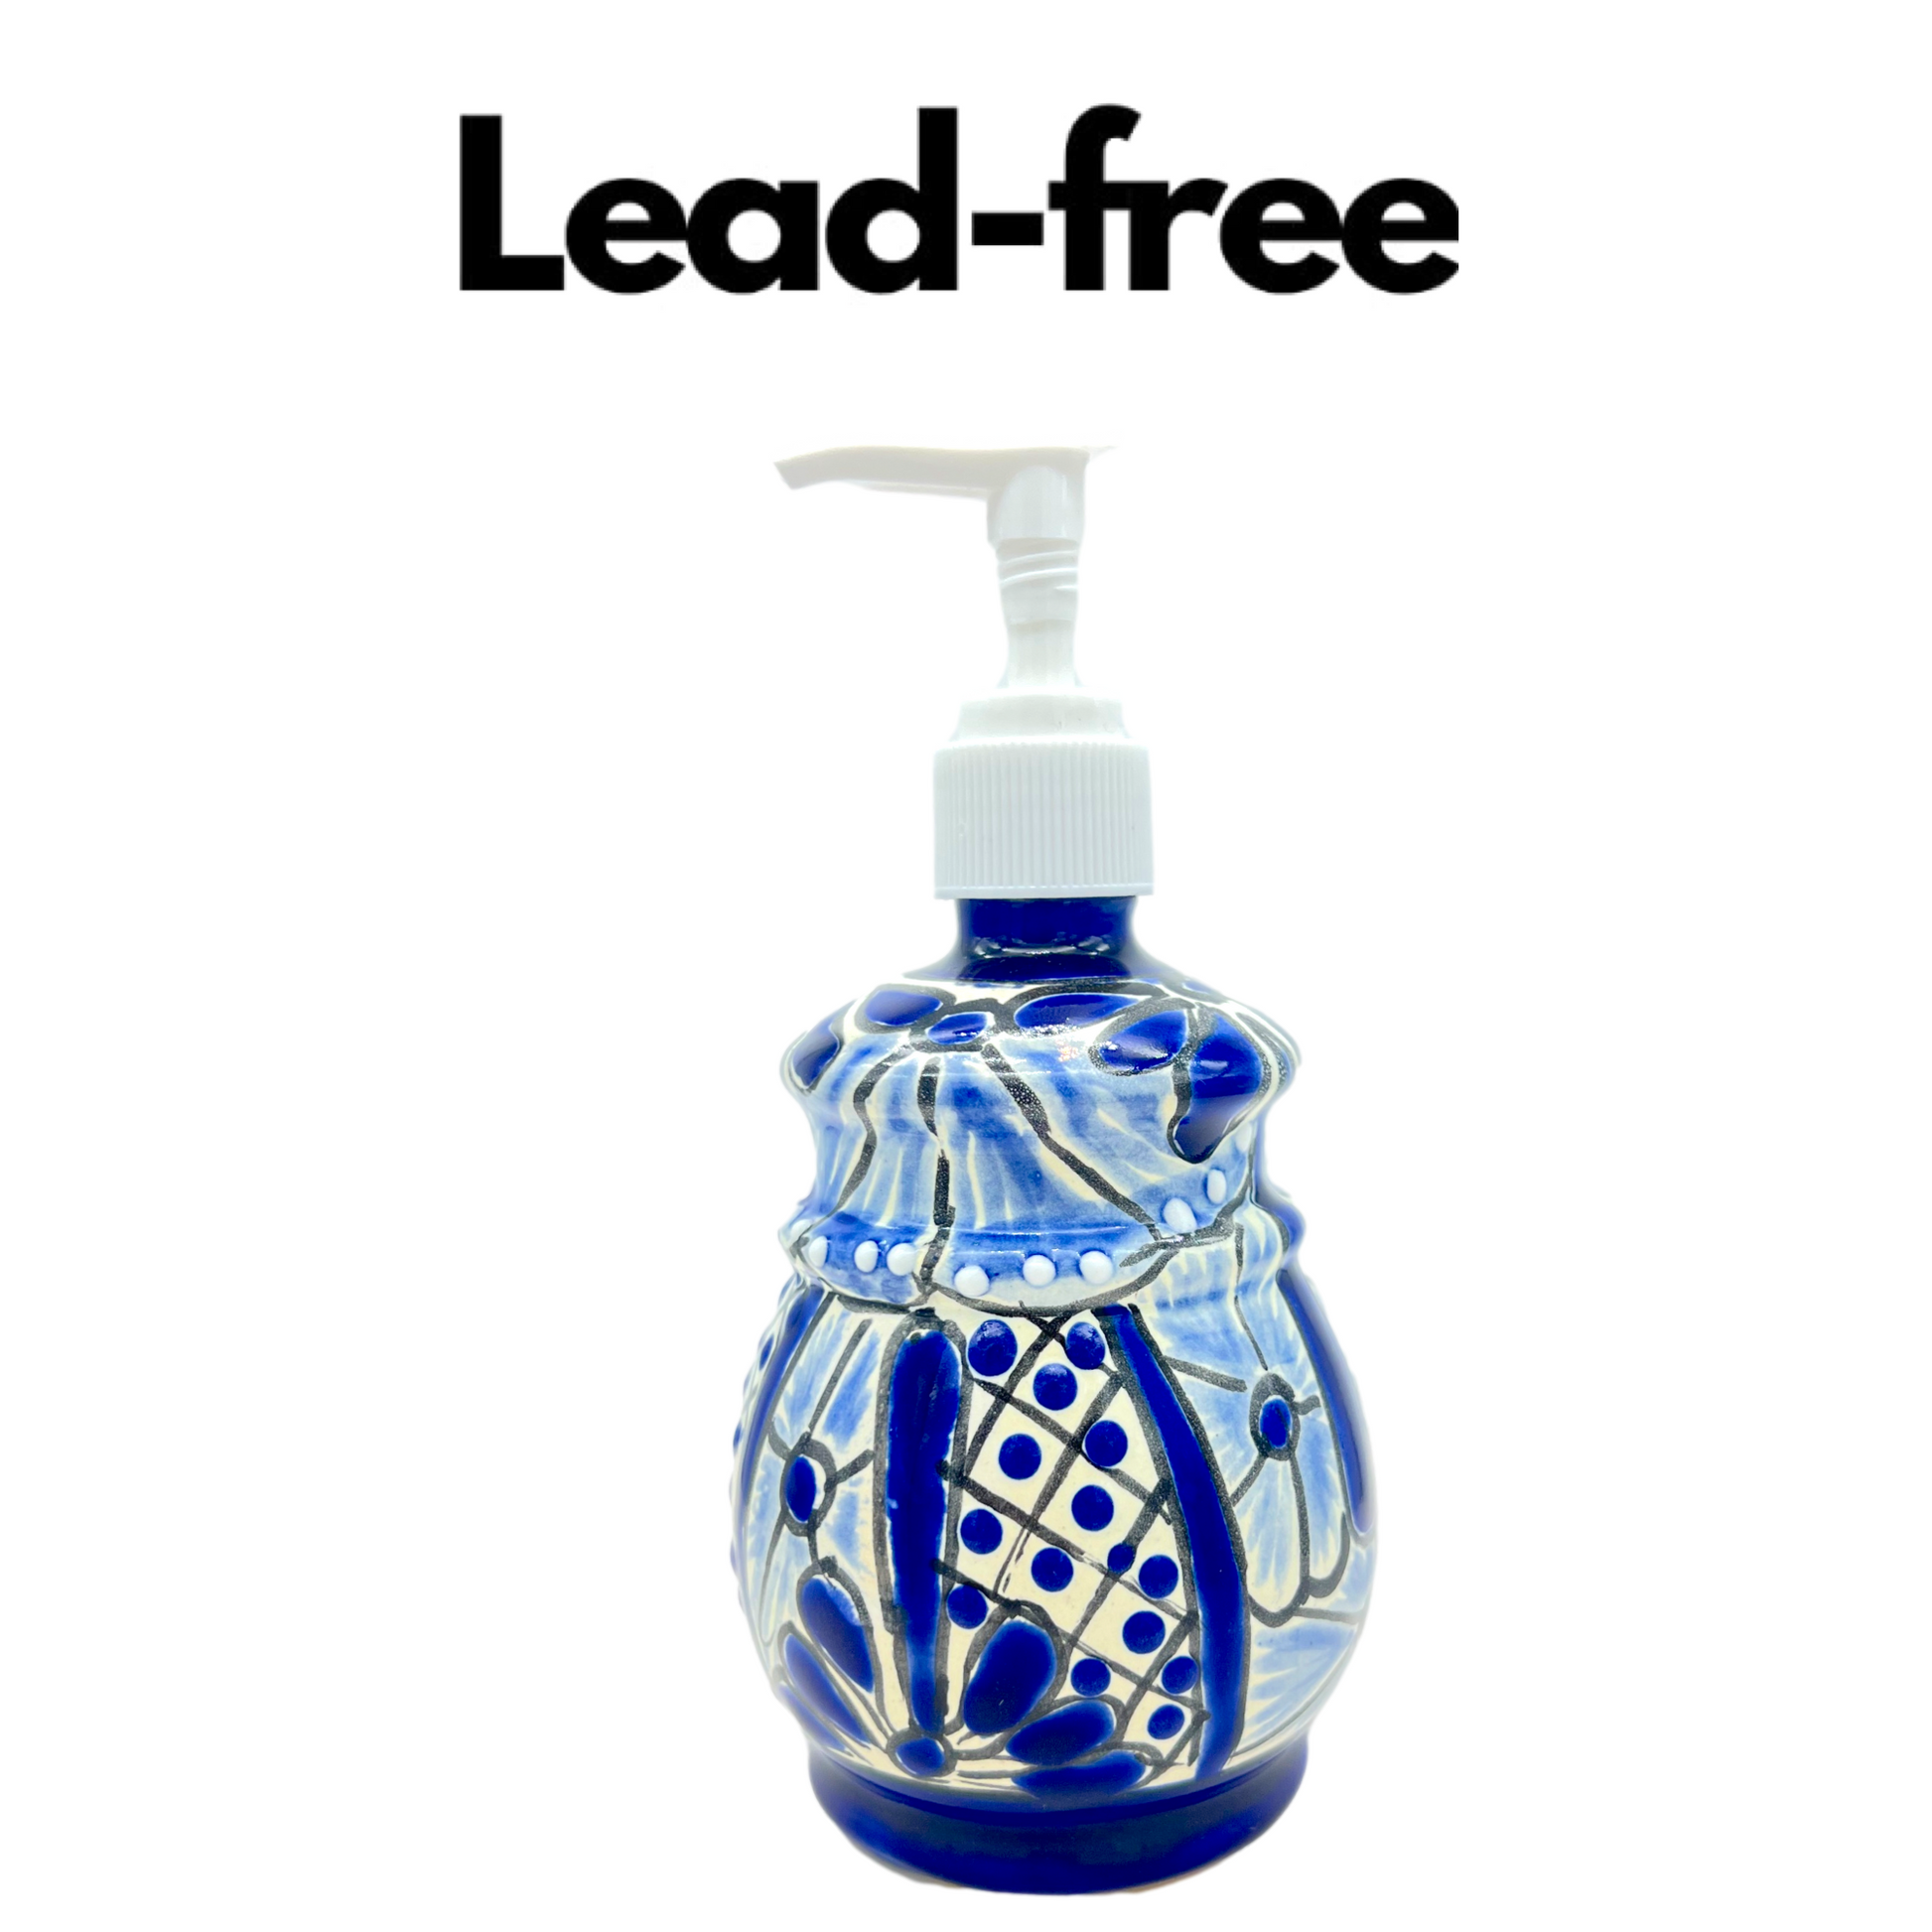 Hand-painted Talavera Ceramic Soap Dispenser in blue and white, a unique addition to kitchen or bathroom decor. is lead free